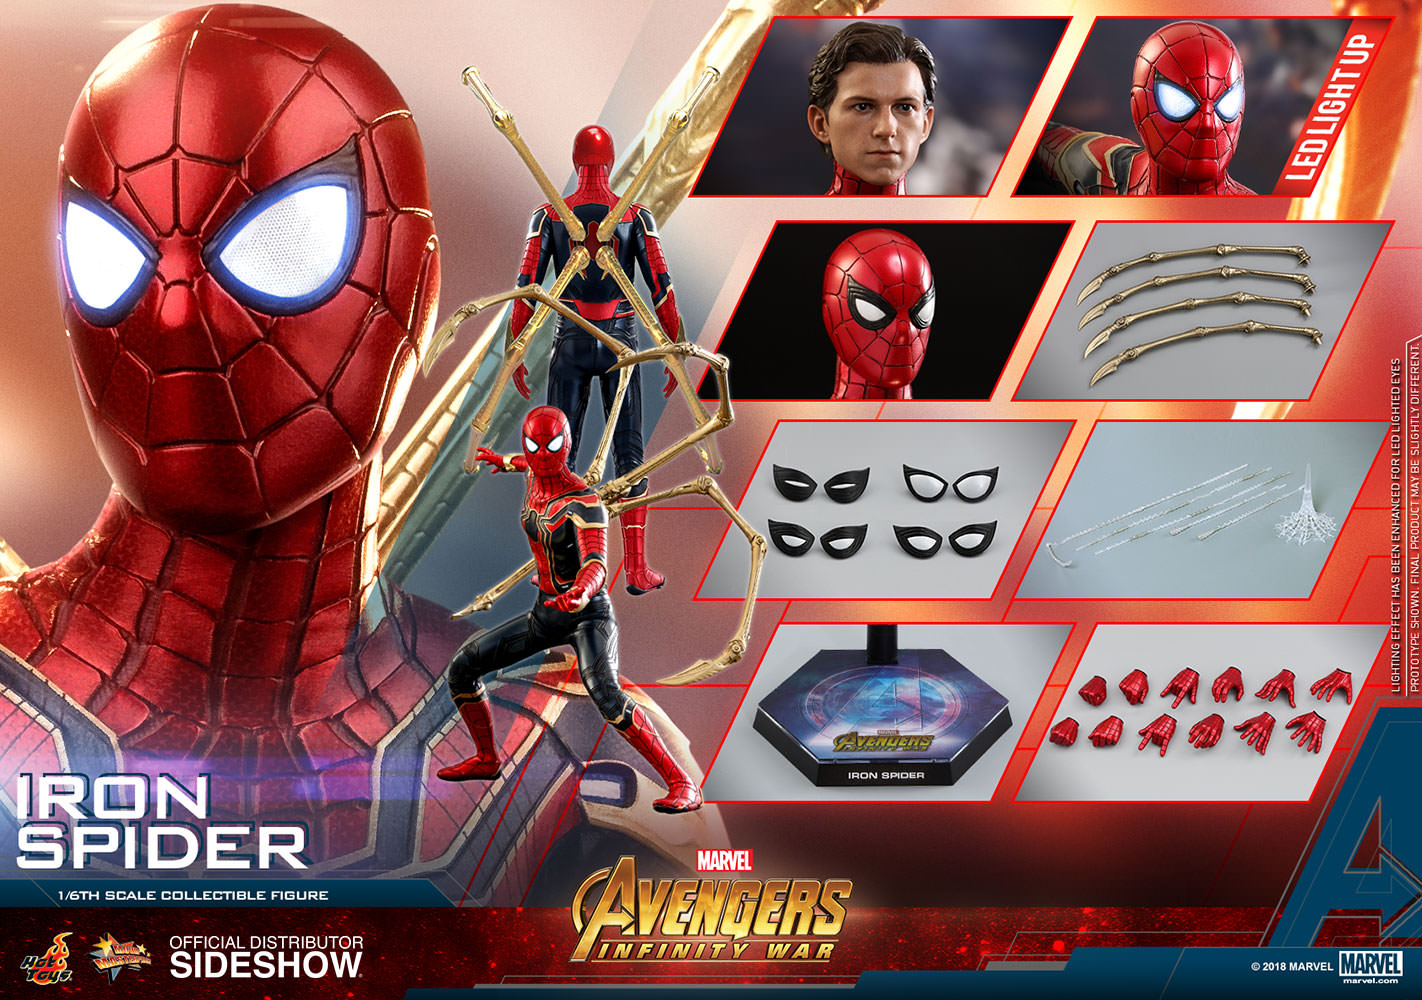 Marvel Spider-Man Iron Spider Avengers Infinity War Action Figure Toy Fans Gifts 